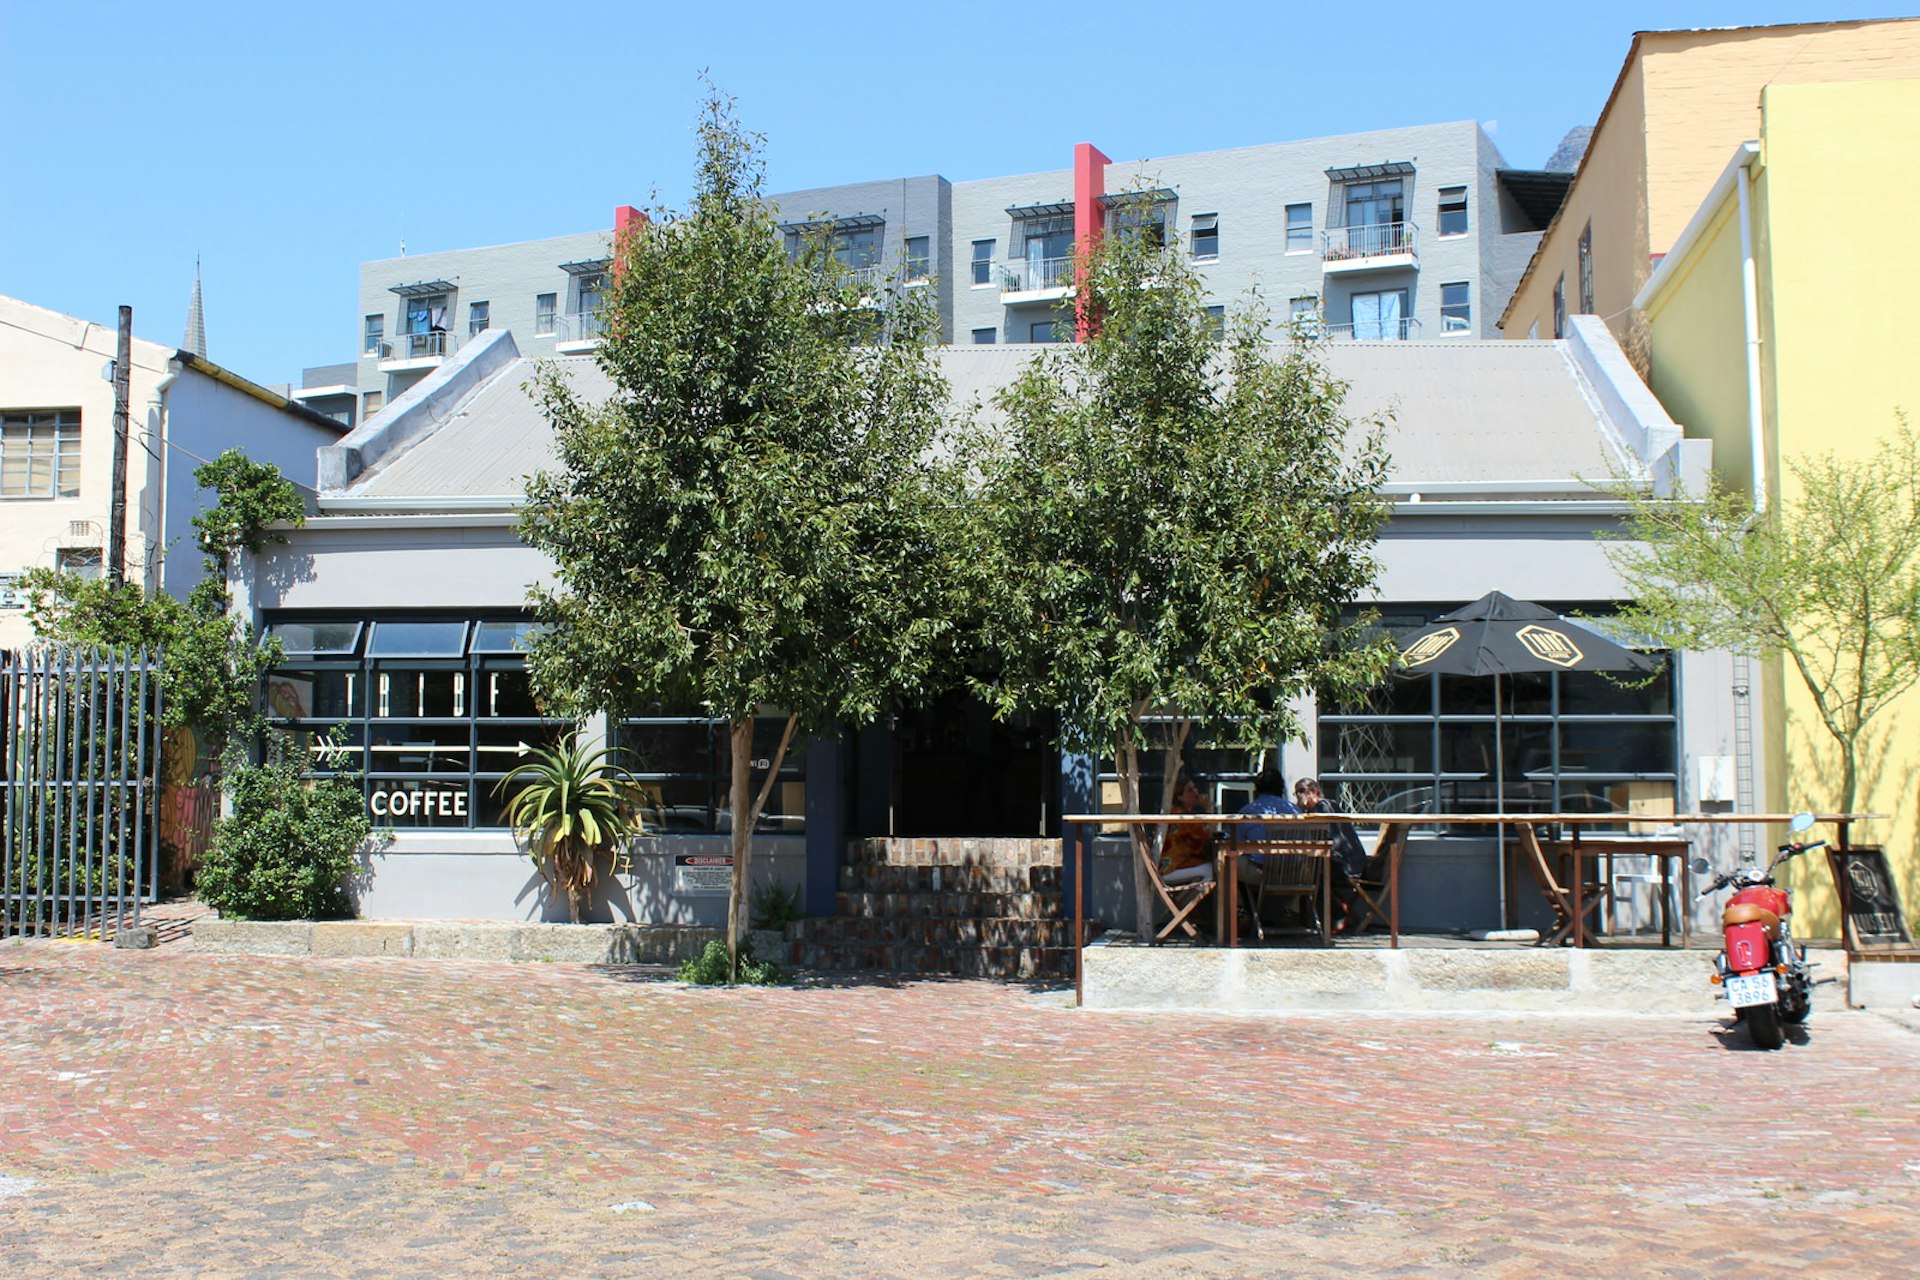 A grey, single storey building sits behind some trees on a wide cobbled street; there is an umbrella and some tables and chairs out front for patrons